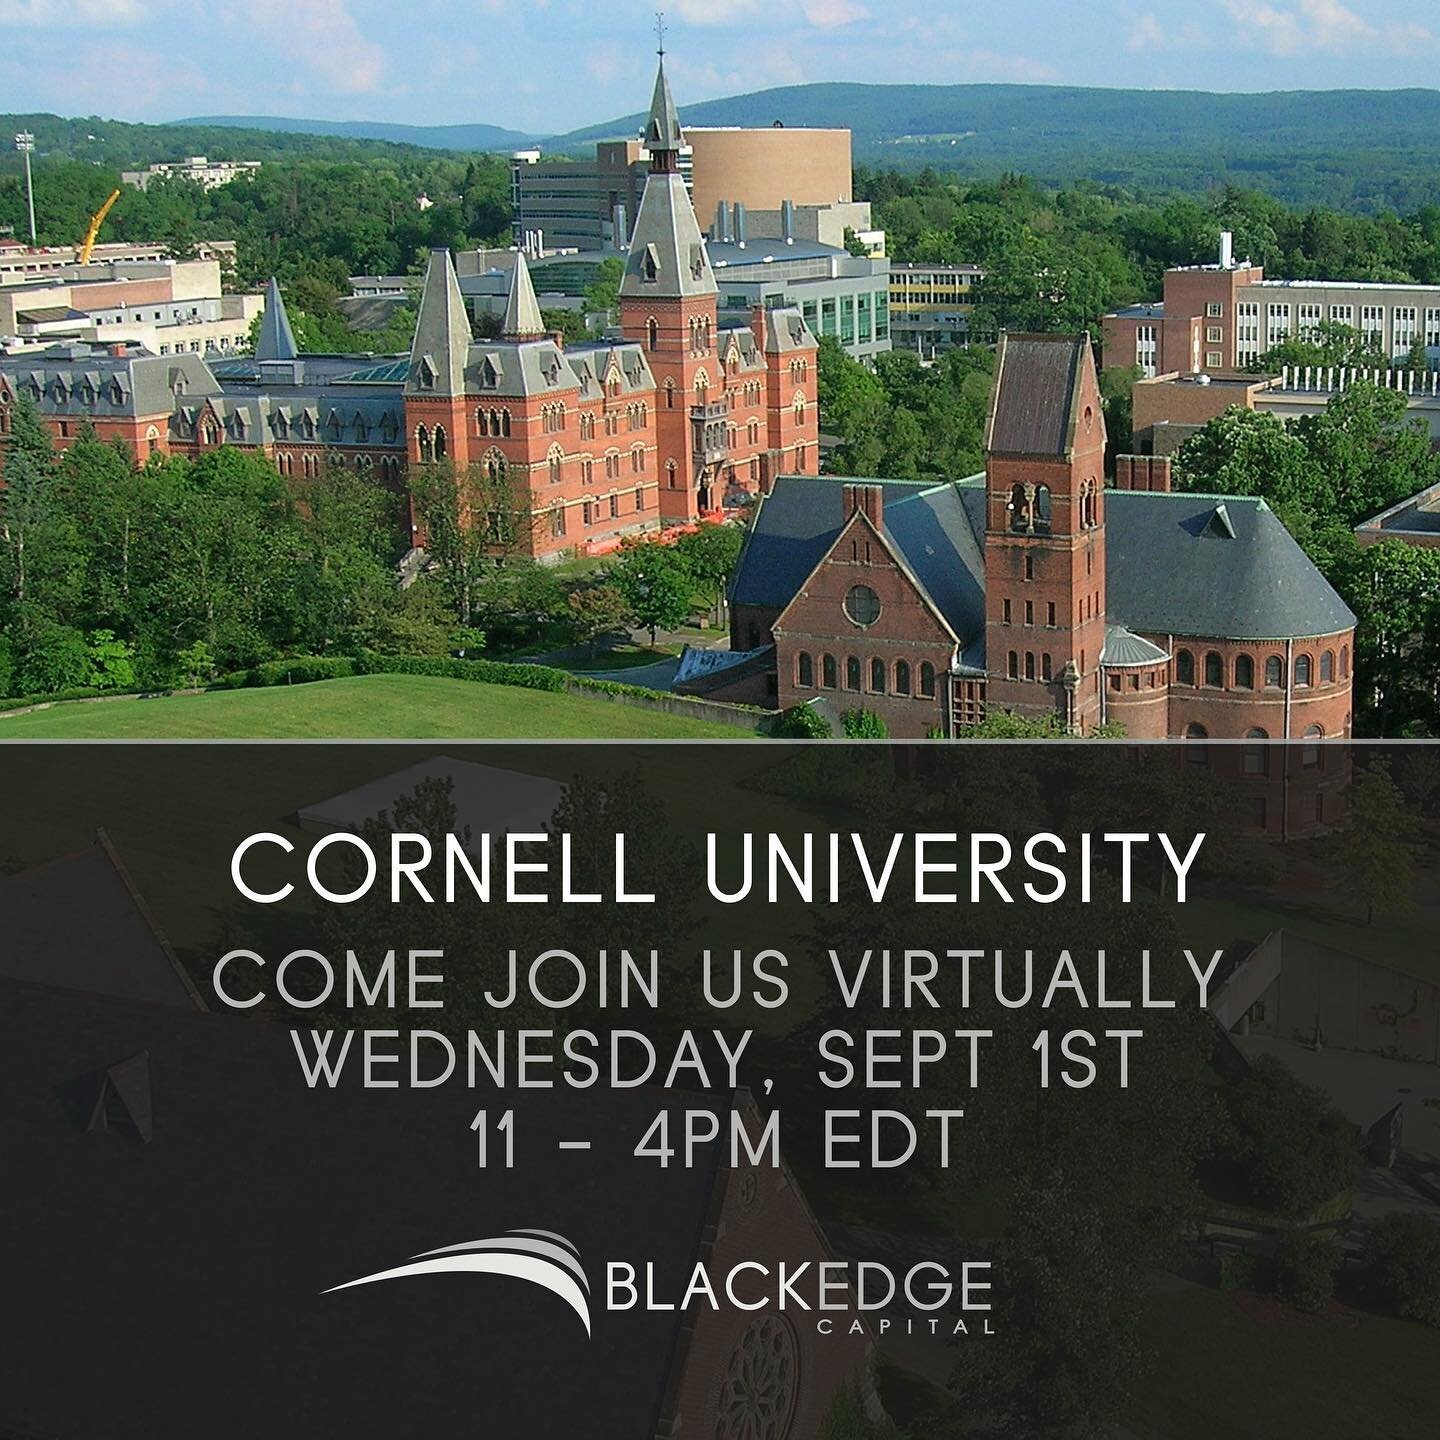 Come meet with us today at the virtual career fair at Cornell! @cornelluniversity @cornelleng